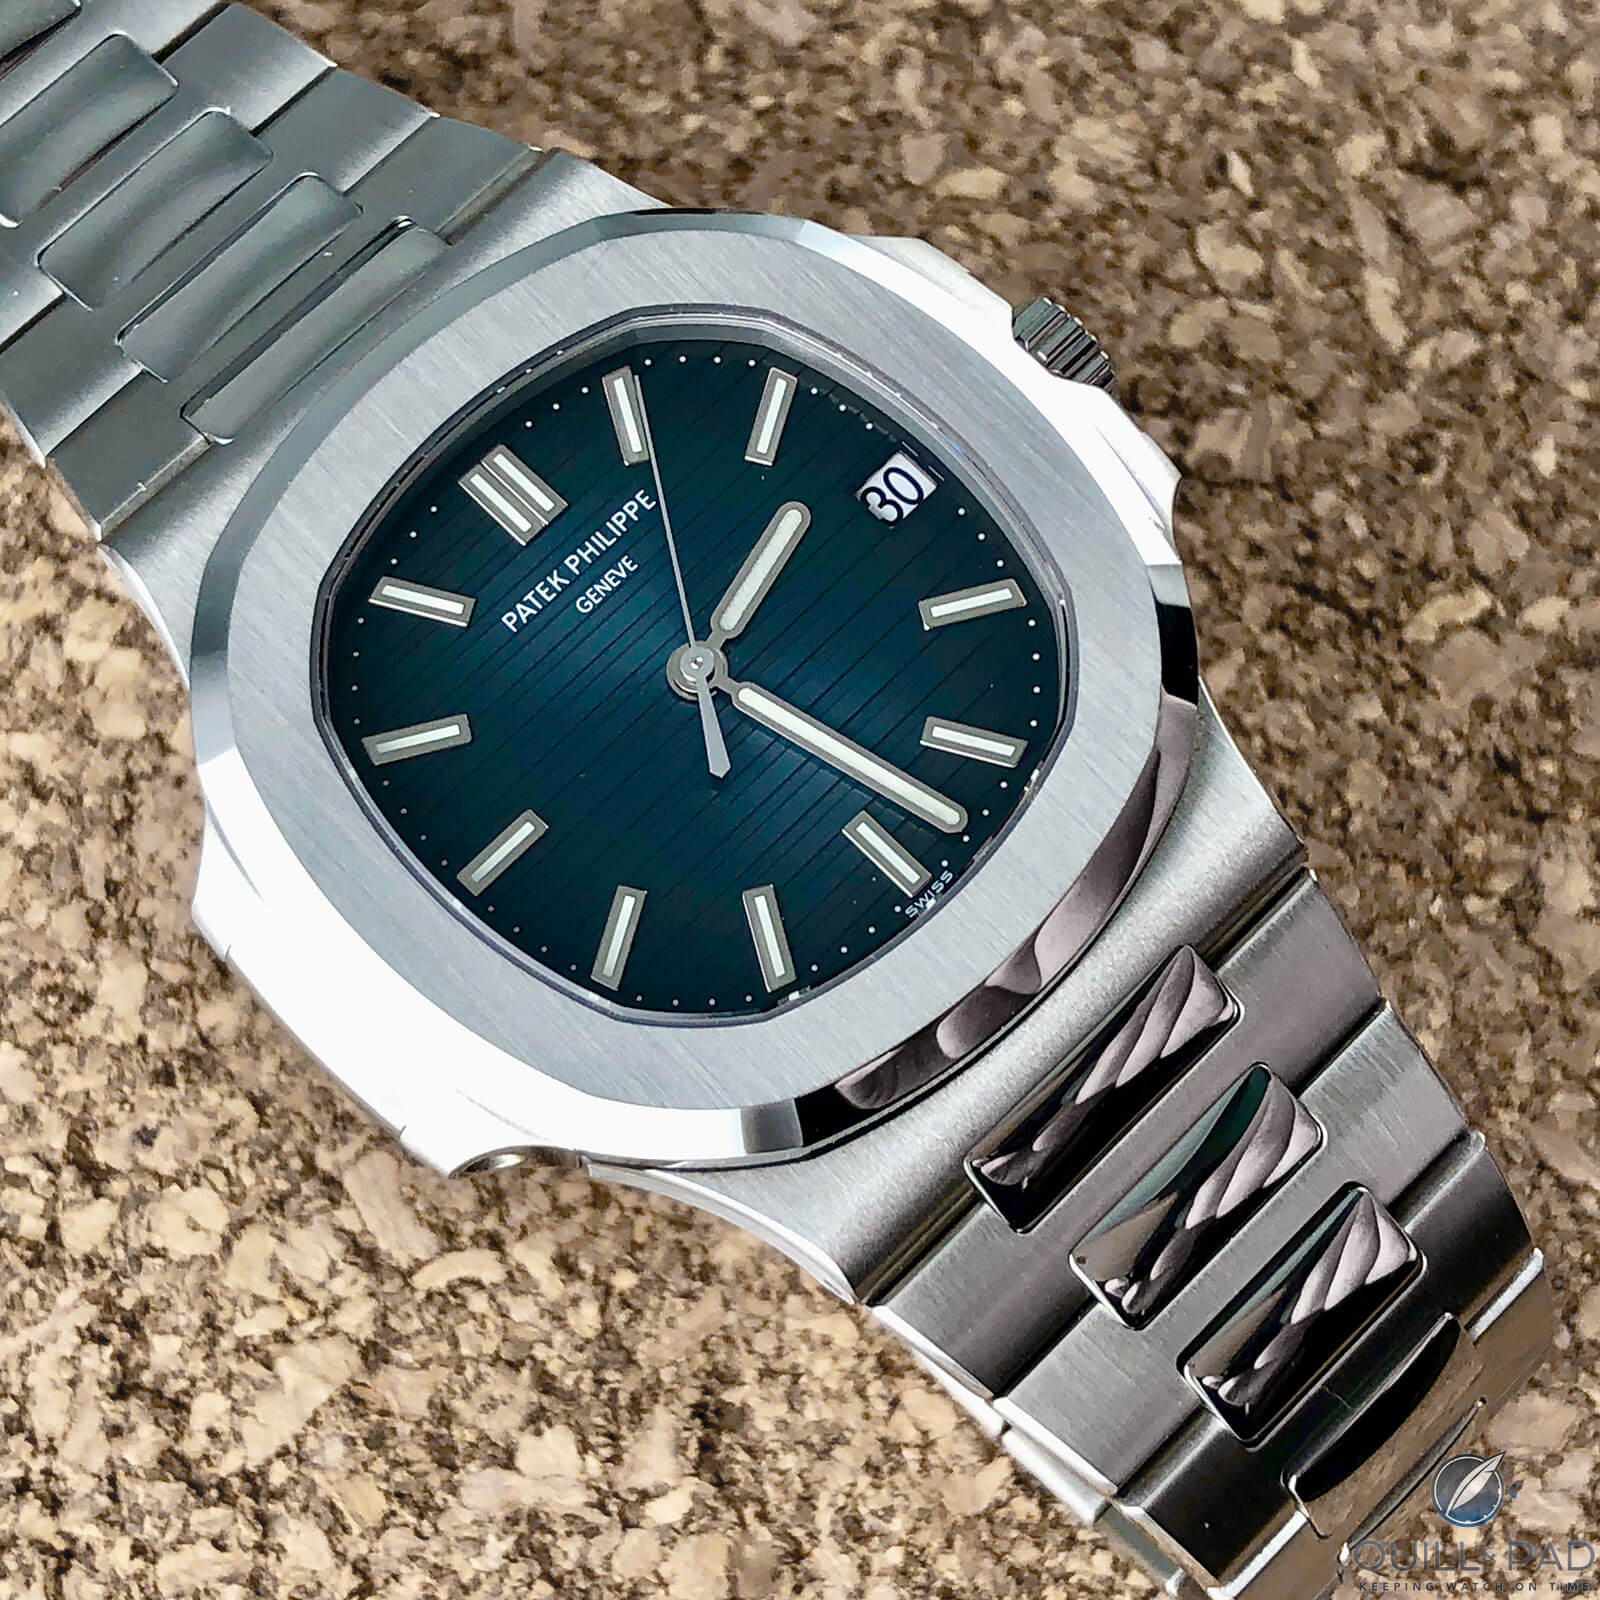 Why the Patek Philippe Nautilus is King: A Collector Weighs In